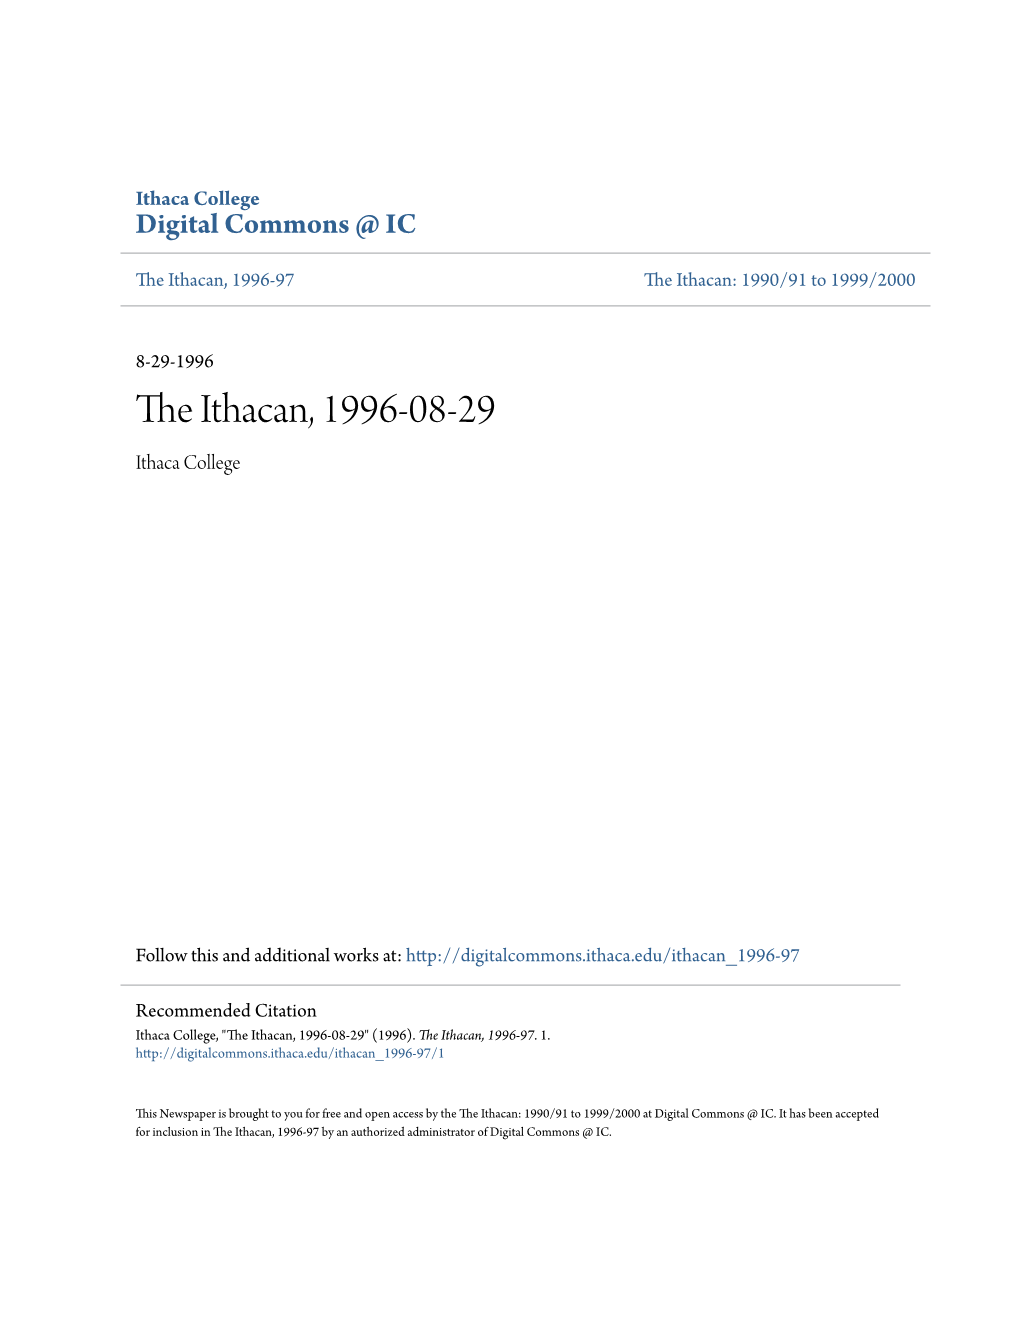 The Ithacan, 1996-08-29